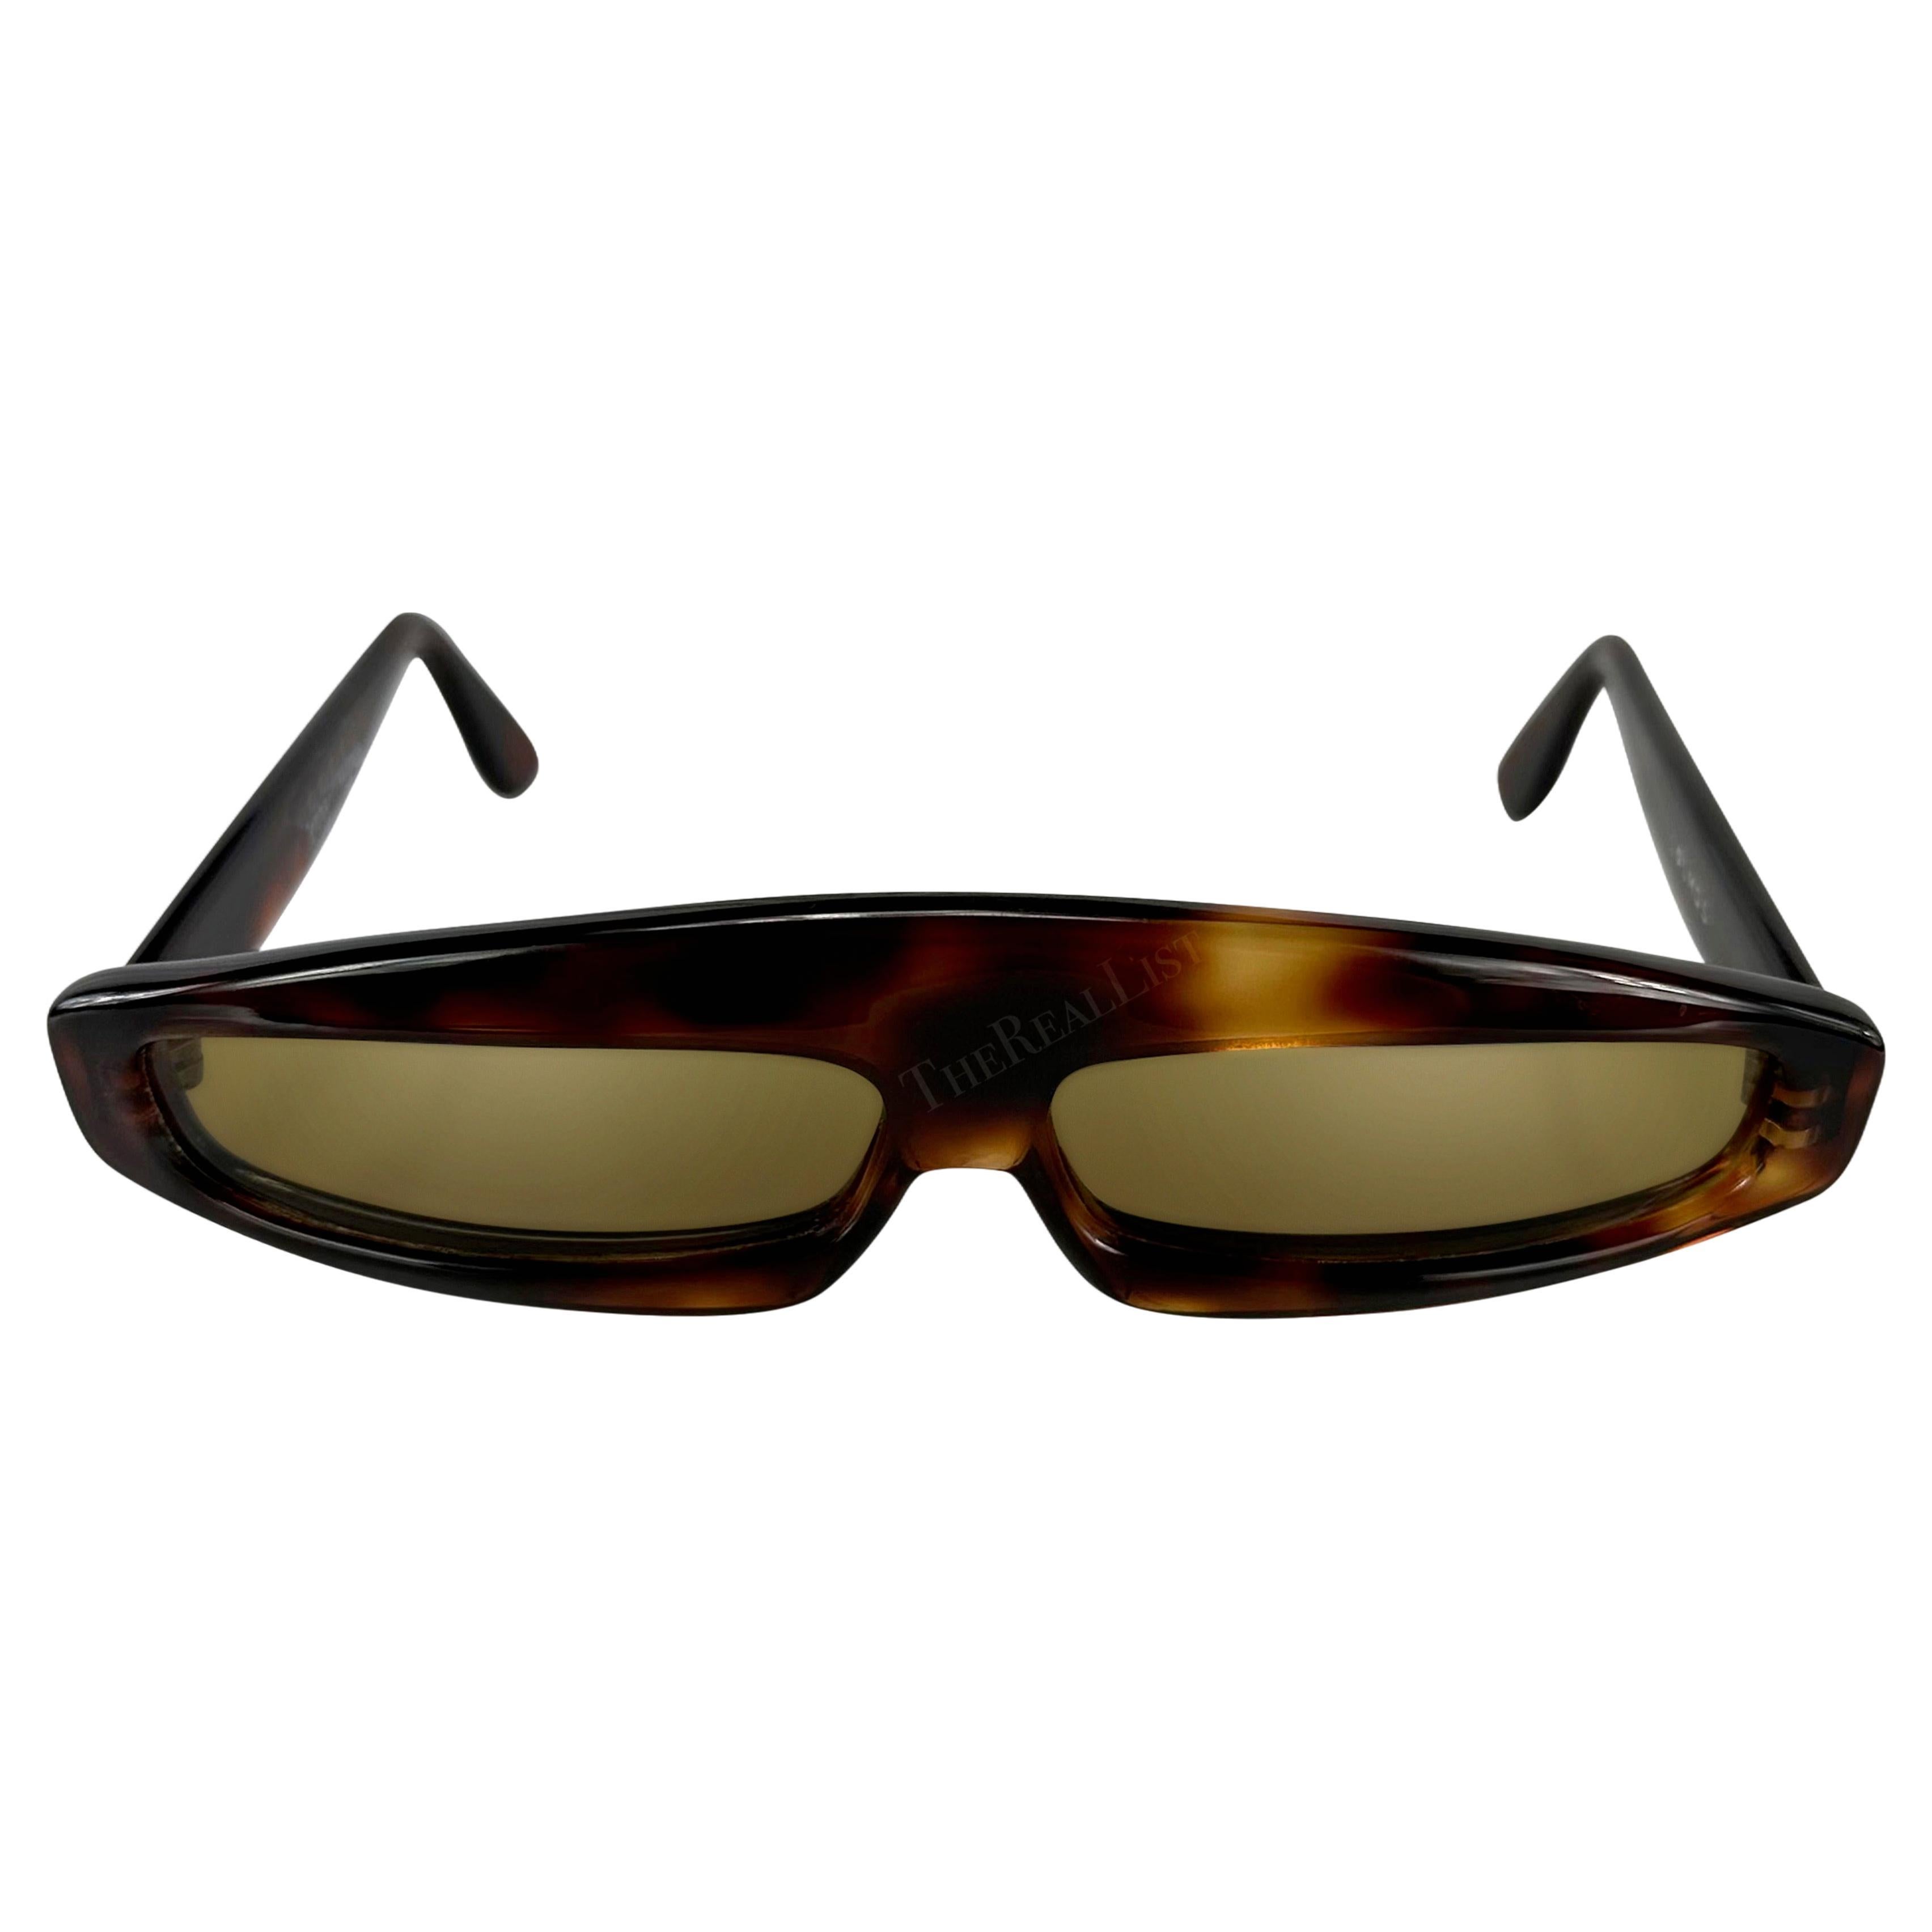 S/S 1979 Thierry Mugler Runway Brown Faux Tortoise Shell Rounded Sunglasses  For Sale 8